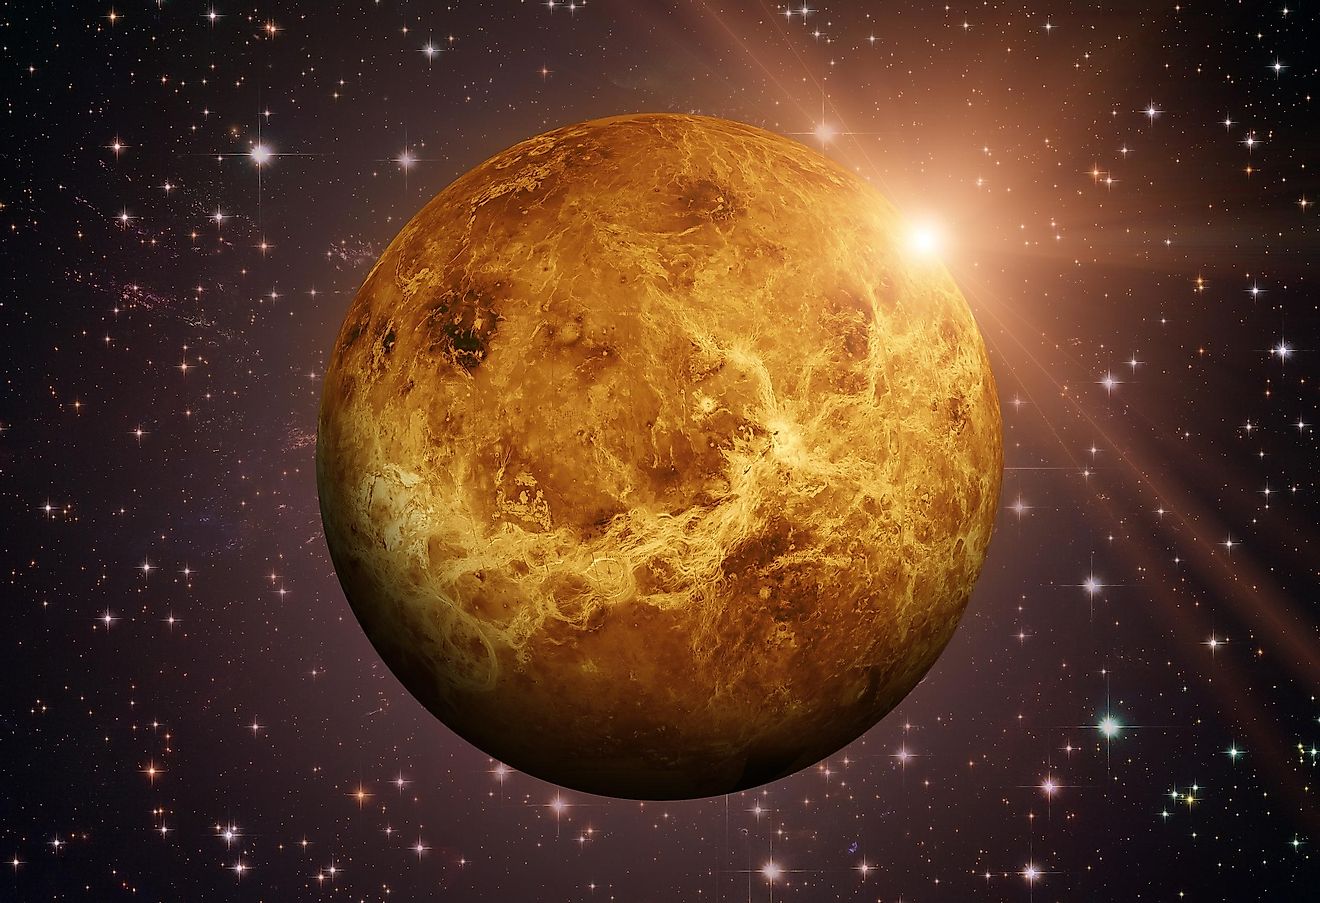 Venus, the Second Closest Planet to the Sun, and Earth's Closest Planetary Neighbor